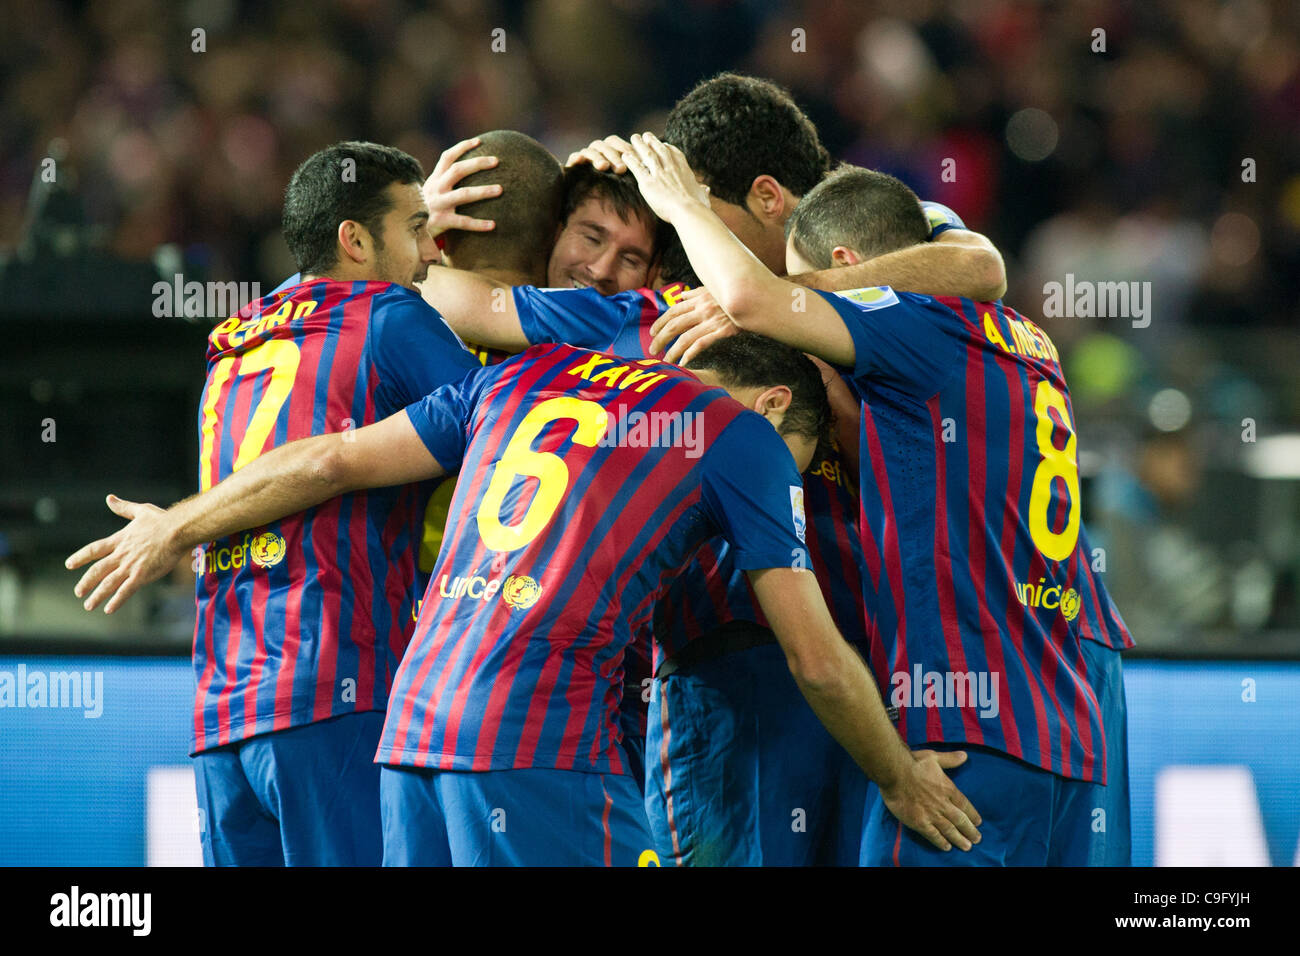 Barcelona team group, DECEMBER 18, 2011 - Football / Soccer : Lionel Messi of Barcelona celebrates his 2nd goal with Pedro Rodriguez, Andres Iniesta and Xavi during the FIFA Club World Cup Japan 2011 Final match between Santos FC 0-4 FC Barcelona at Yokohama International Stadium in Kanagawa, Japan. Stock Photo